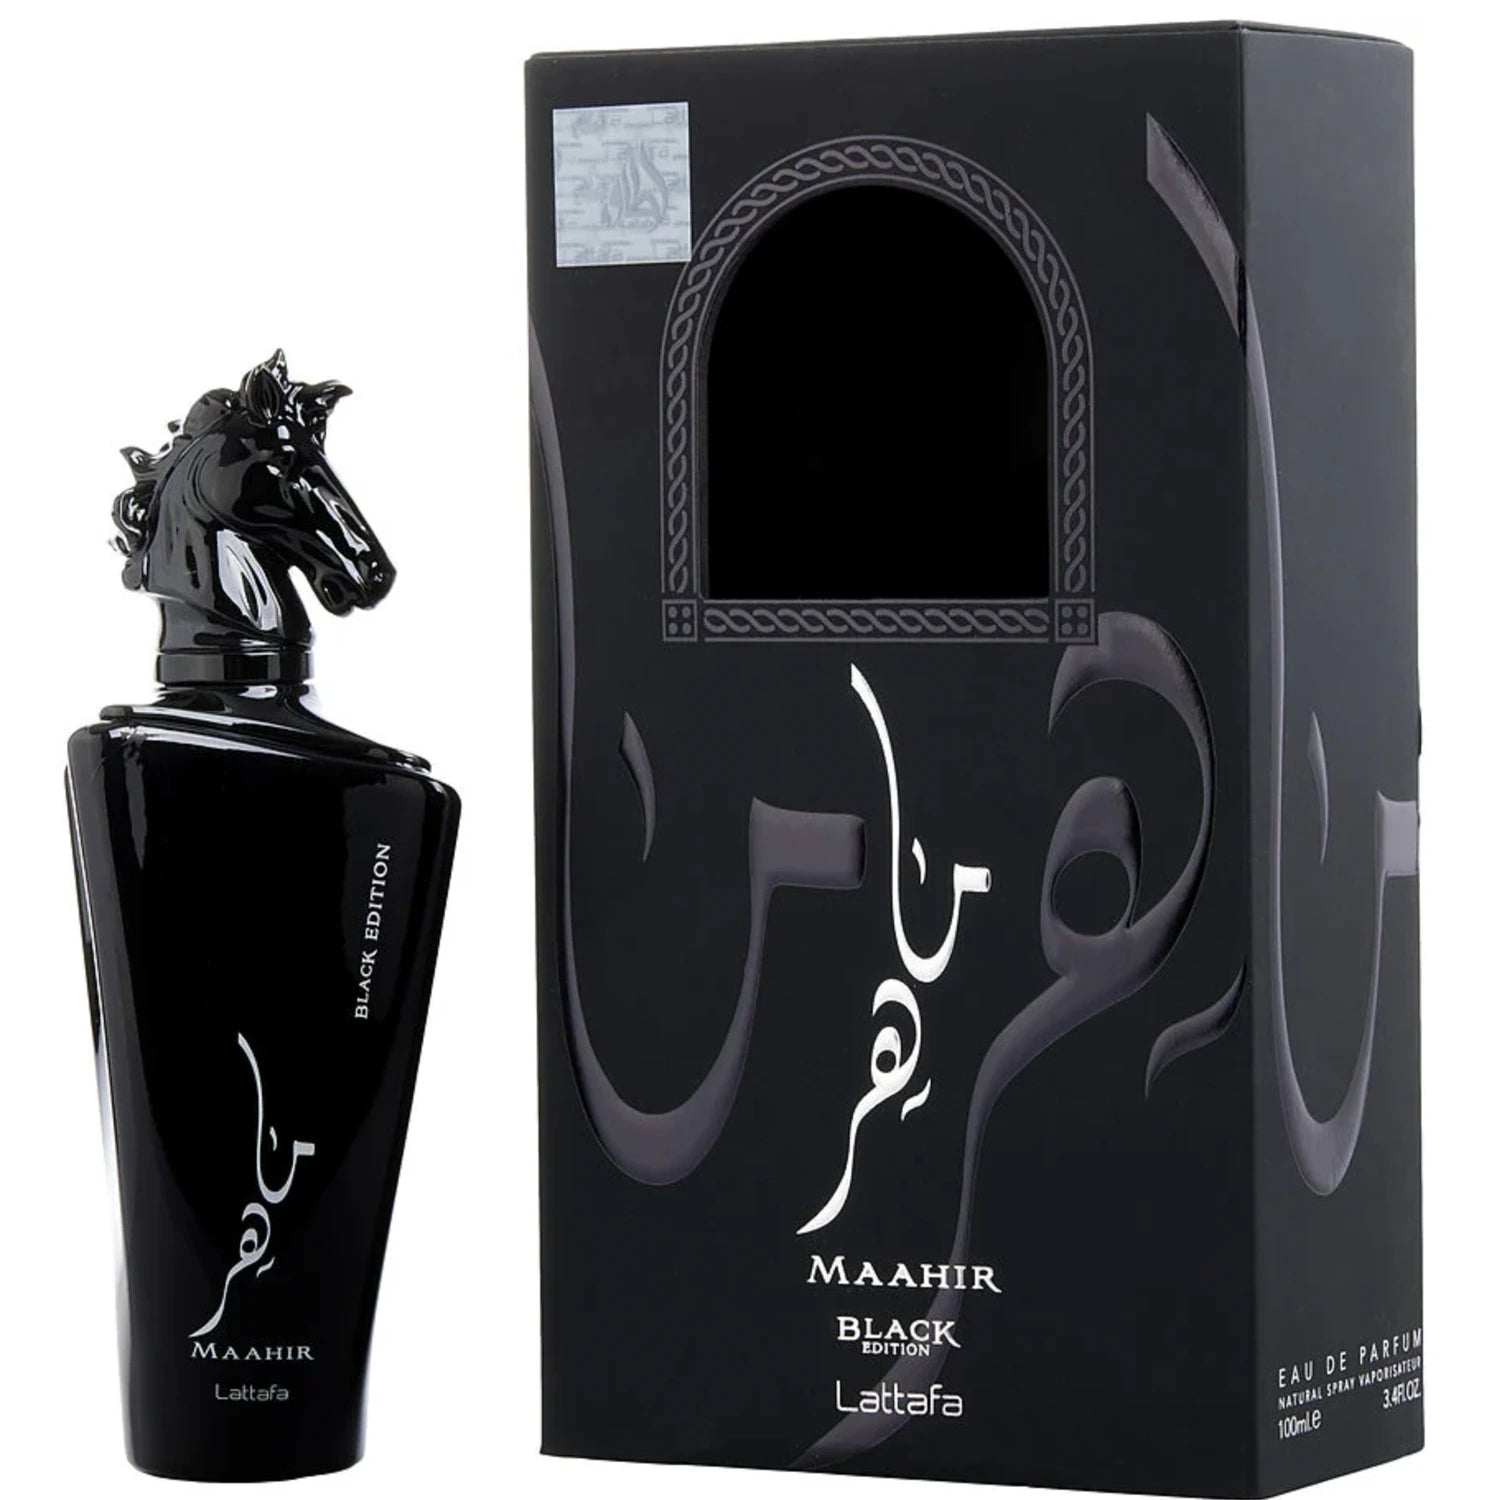 <p>Maahir Black Edition by Lattafa Perfumes is an exceptionally crafted Amber Spicy unisex fragrance, perfect for special occasions. Notes of Black Pepper, Pink Pepper, Saffron, Labdanum, Cade oil, Gurjan Balsam and Rhubarb mingle with undertones of Leather, Cedar, Patchouli, Guaiac Wood, Musk and Moss. </p>